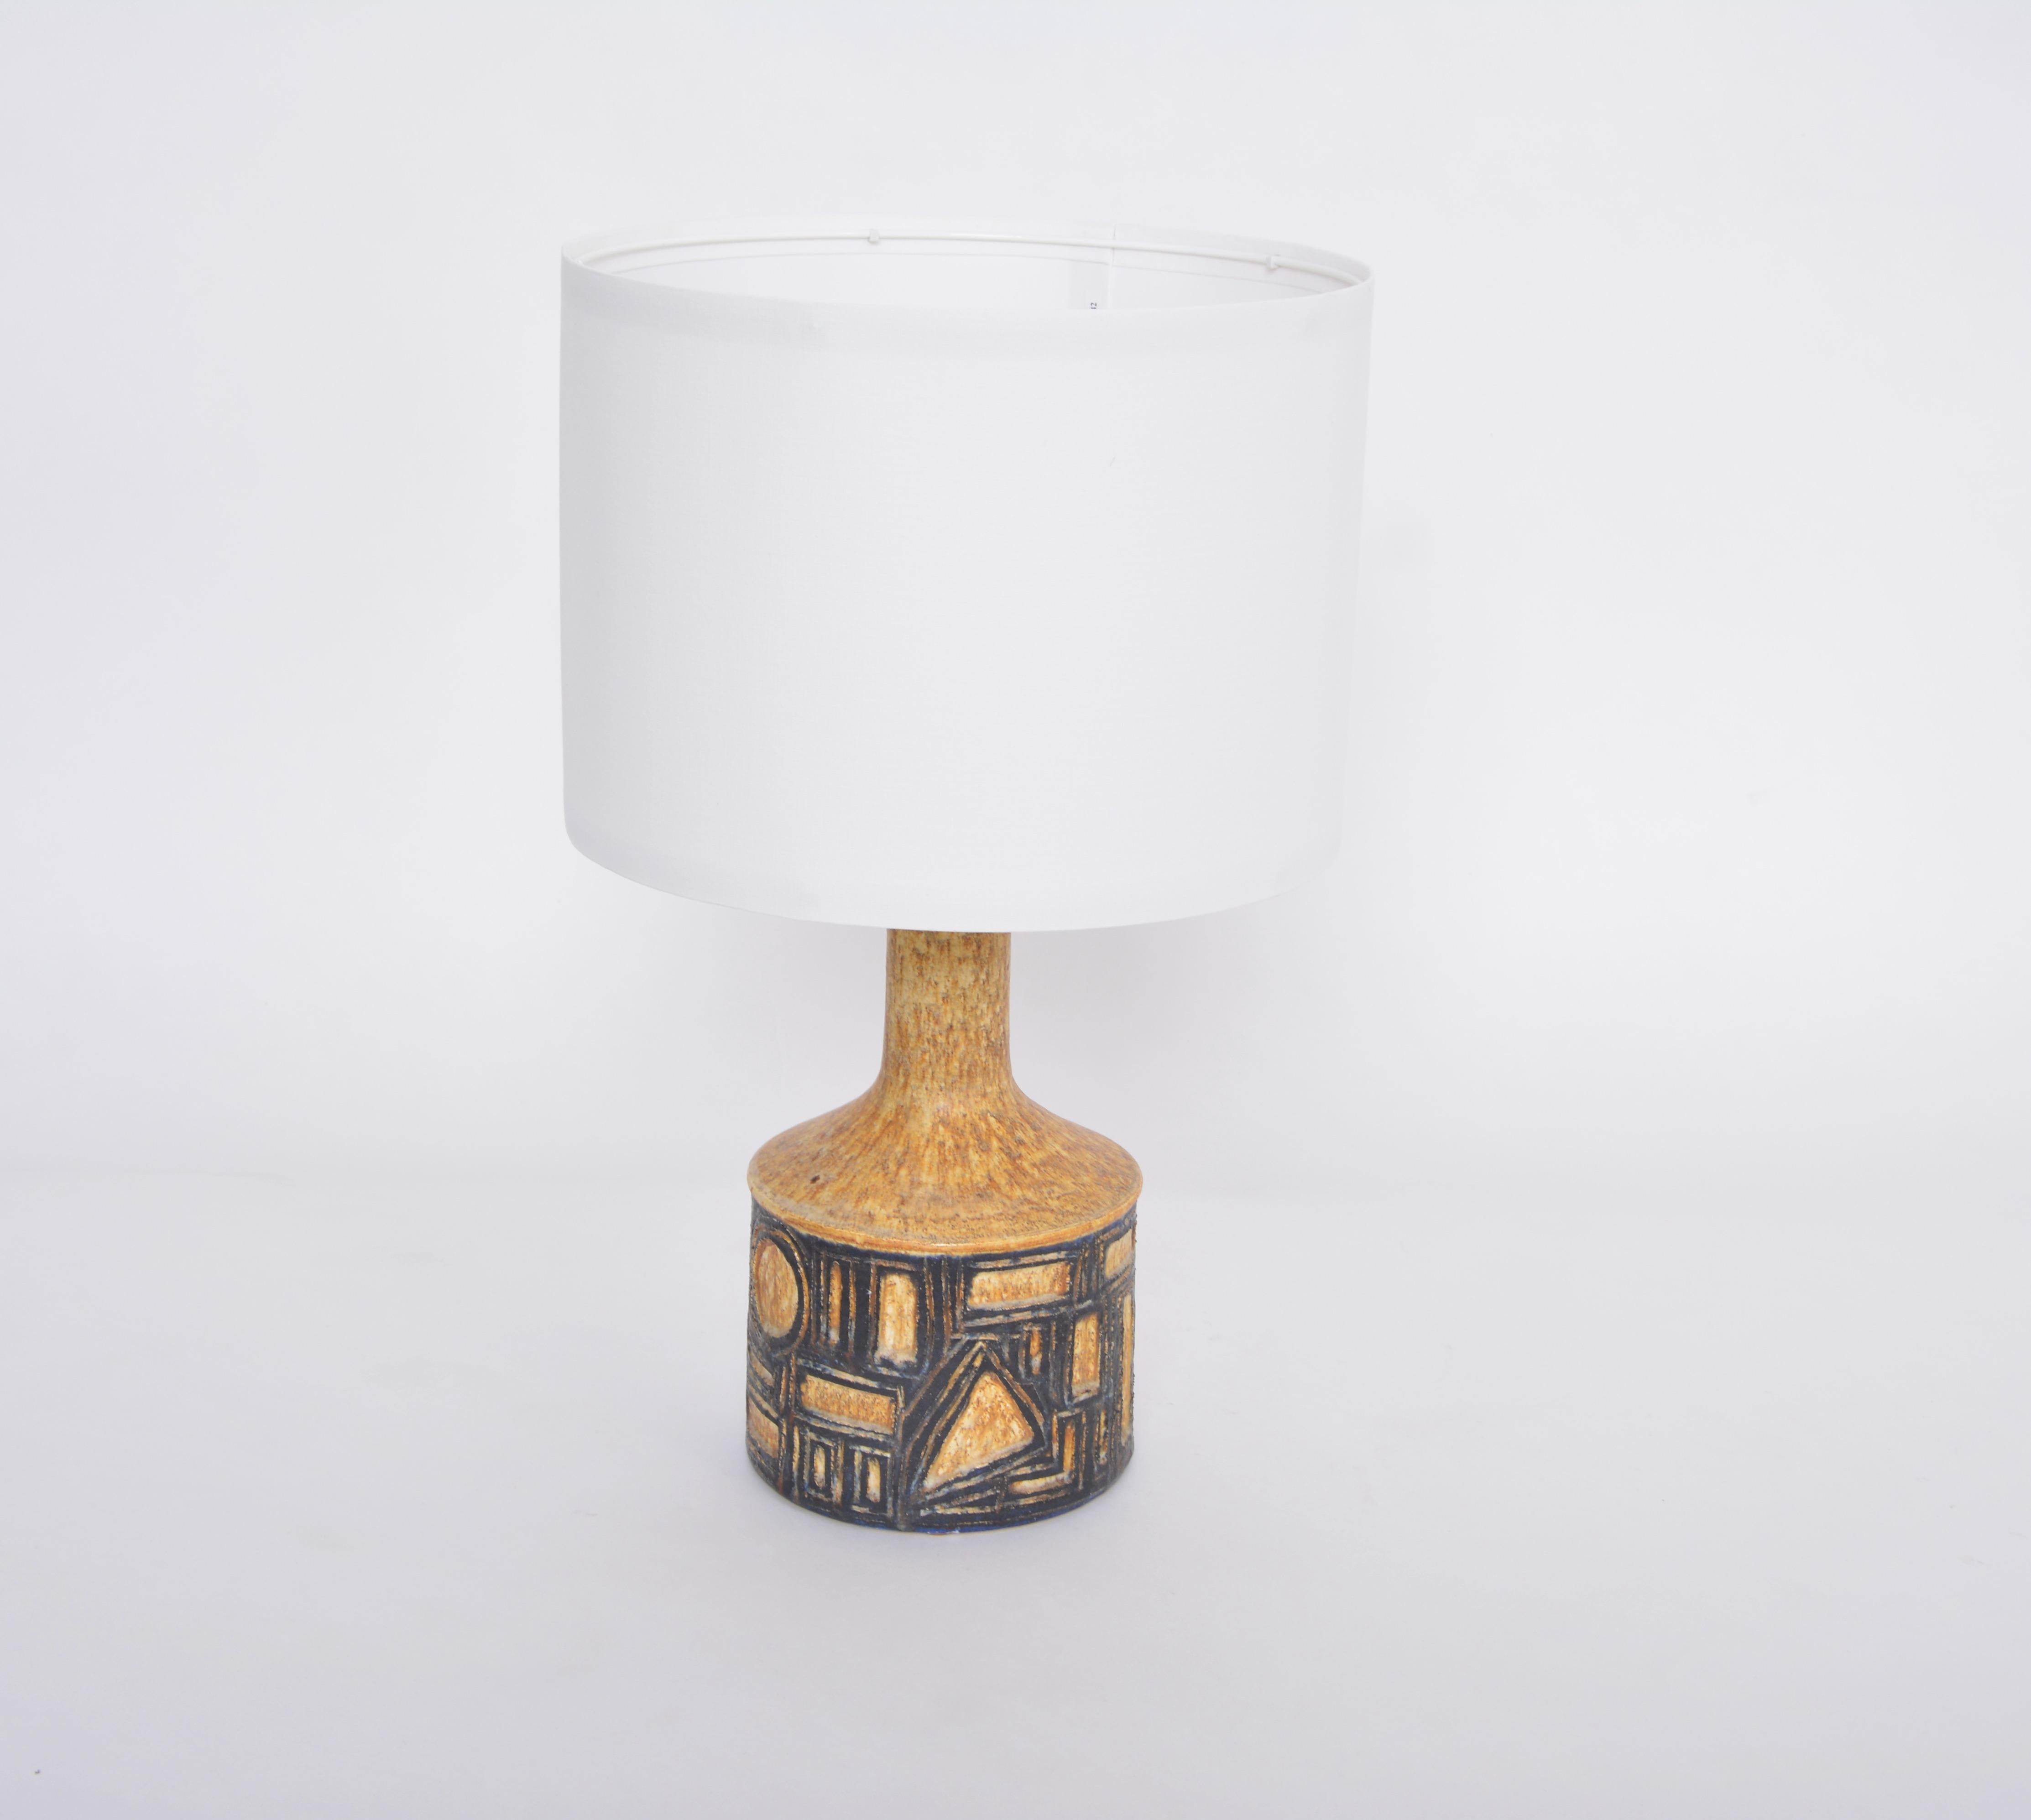 Unique table lamp handmade probably in the 1970s by artist Jette Hellerøe in Denmark. The lamp is made from yellow glazed stoneware and decorated with black abstract geometric figures and glazed in an expressive glossy glazing. The lamp is a